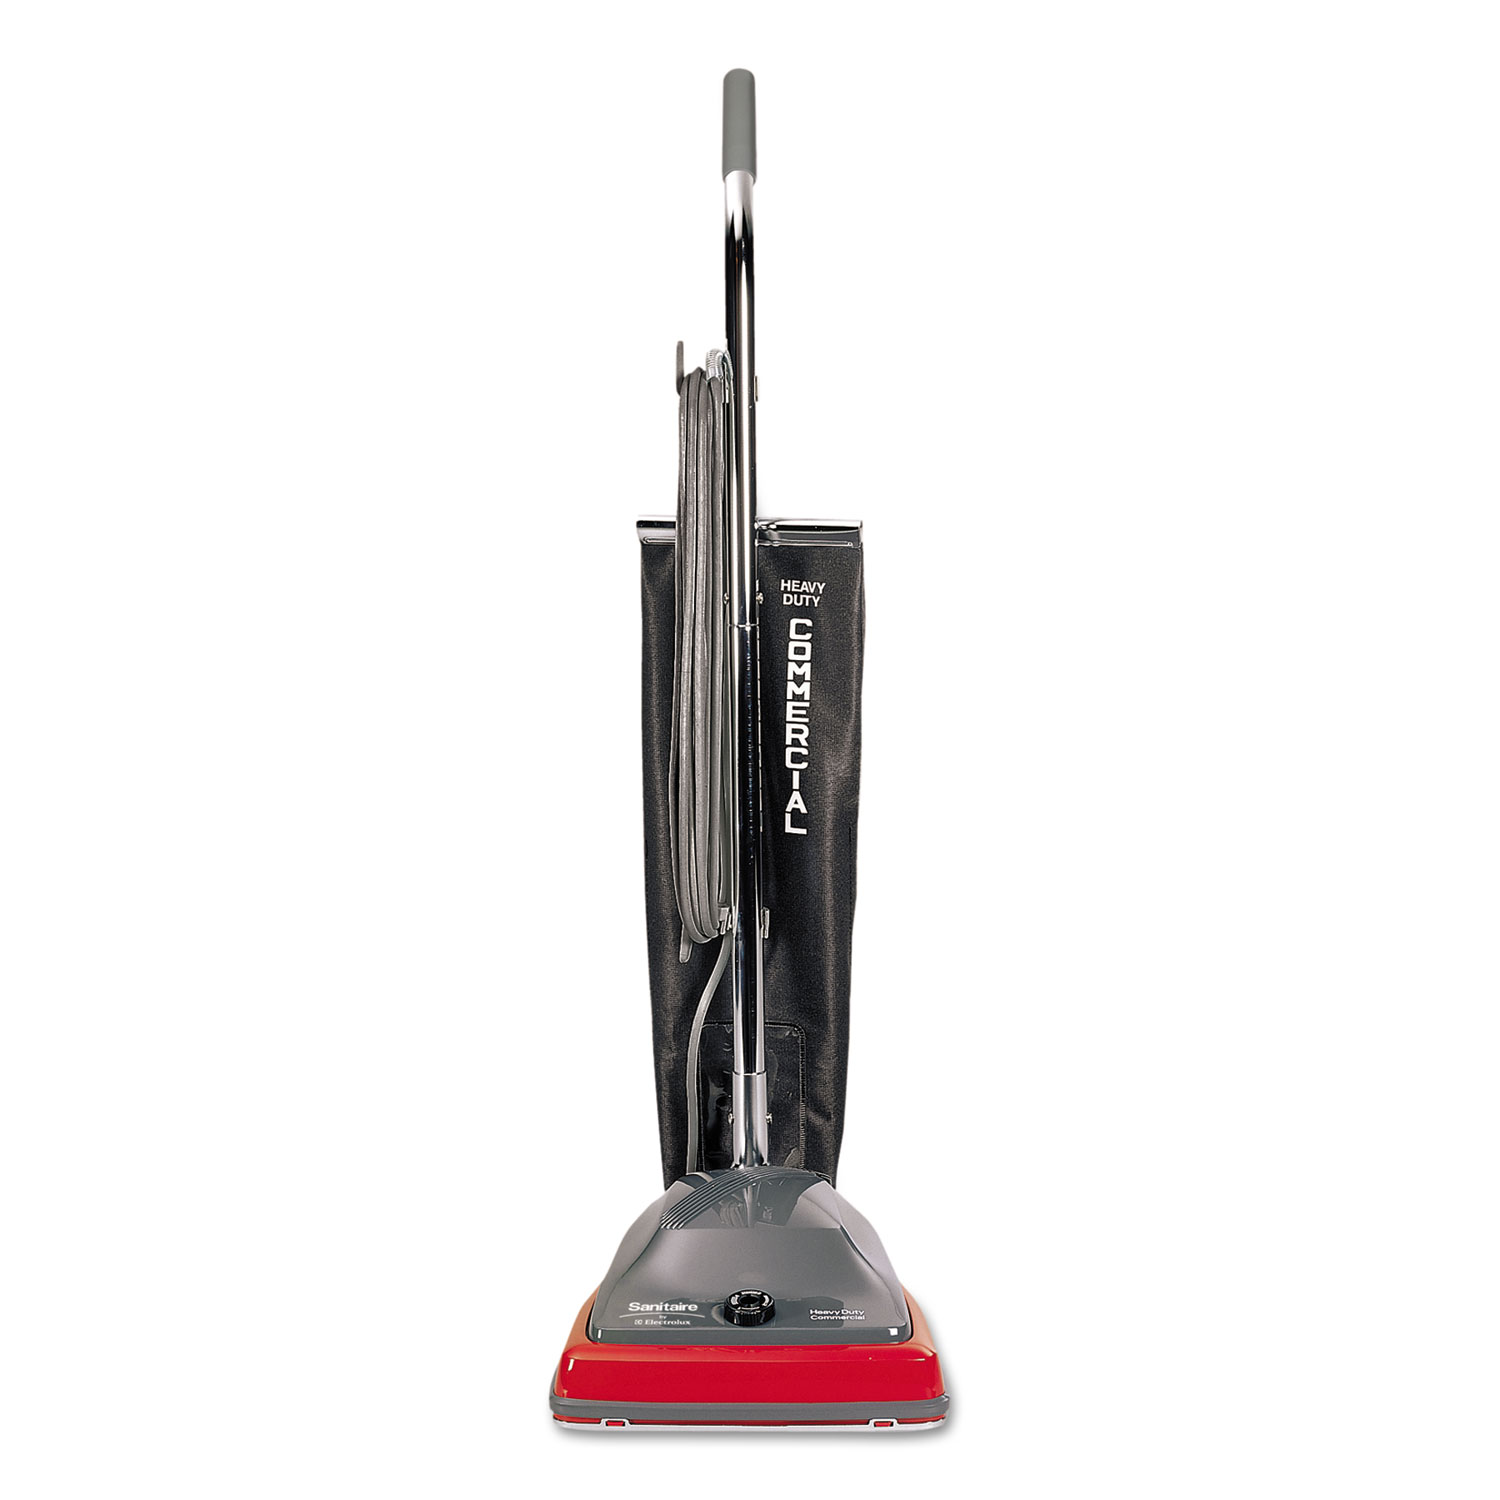  Sanitaire SC679K TRADITION Upright Vacuum with Shake-Out Bag, 12 lb, Gray/Red (EURSC679K) 